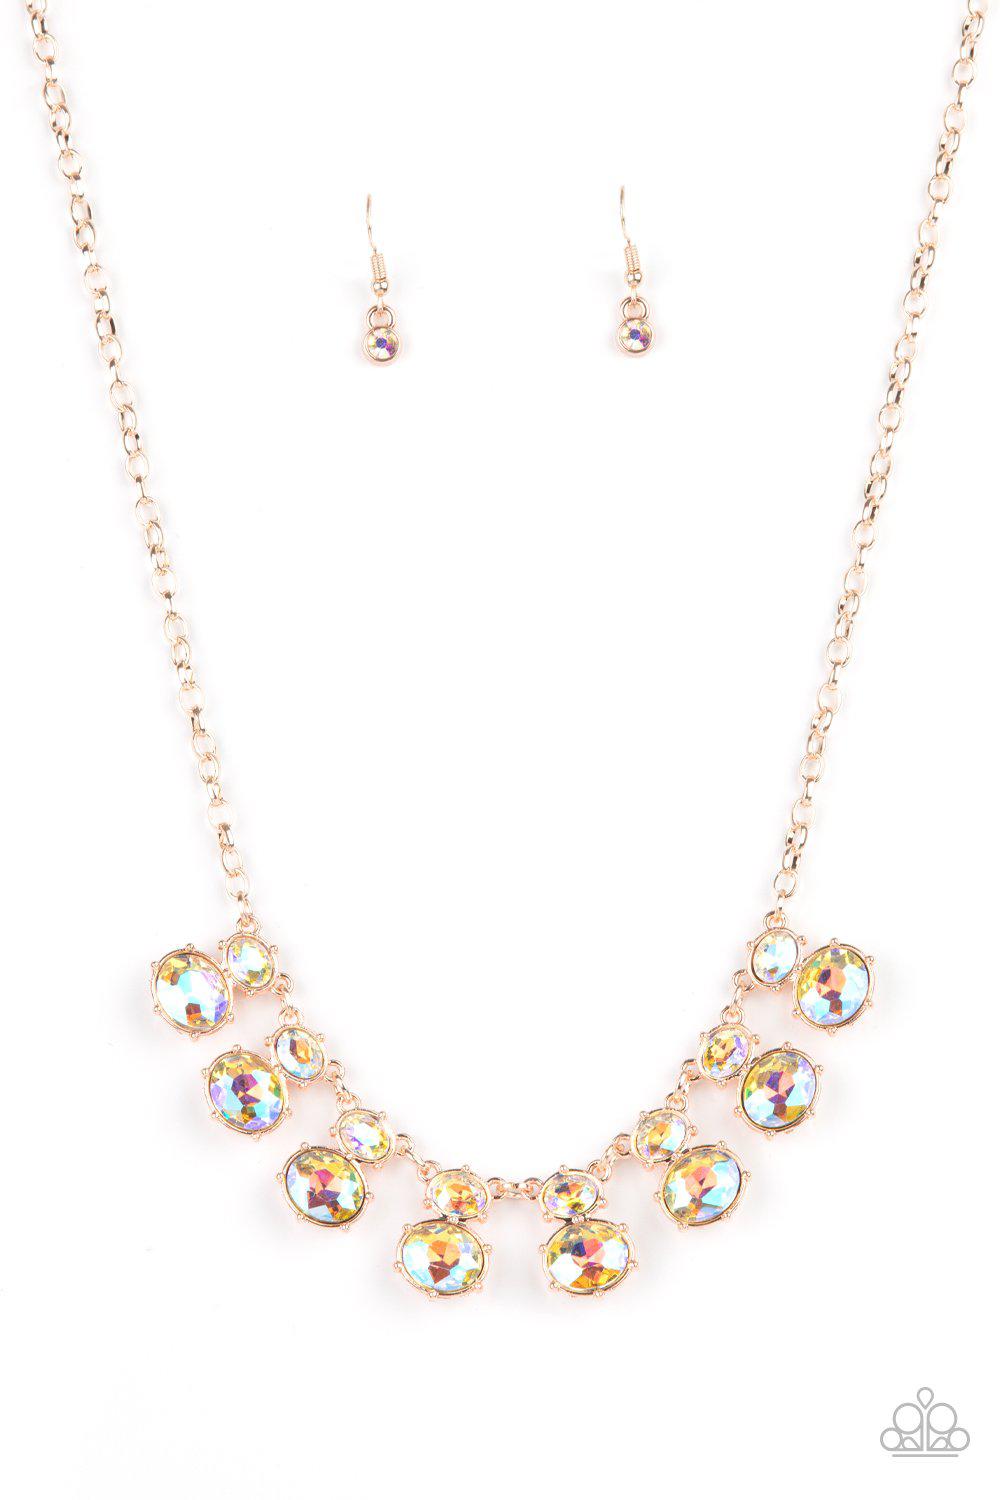 Cosmic Countess Gold and Iridescent Rhinestone Necklace - Paparazzi Accessories LOTP Exclusive July 2021- lightbox - CarasShop.com - $5 Jewelry by Cara Jewels